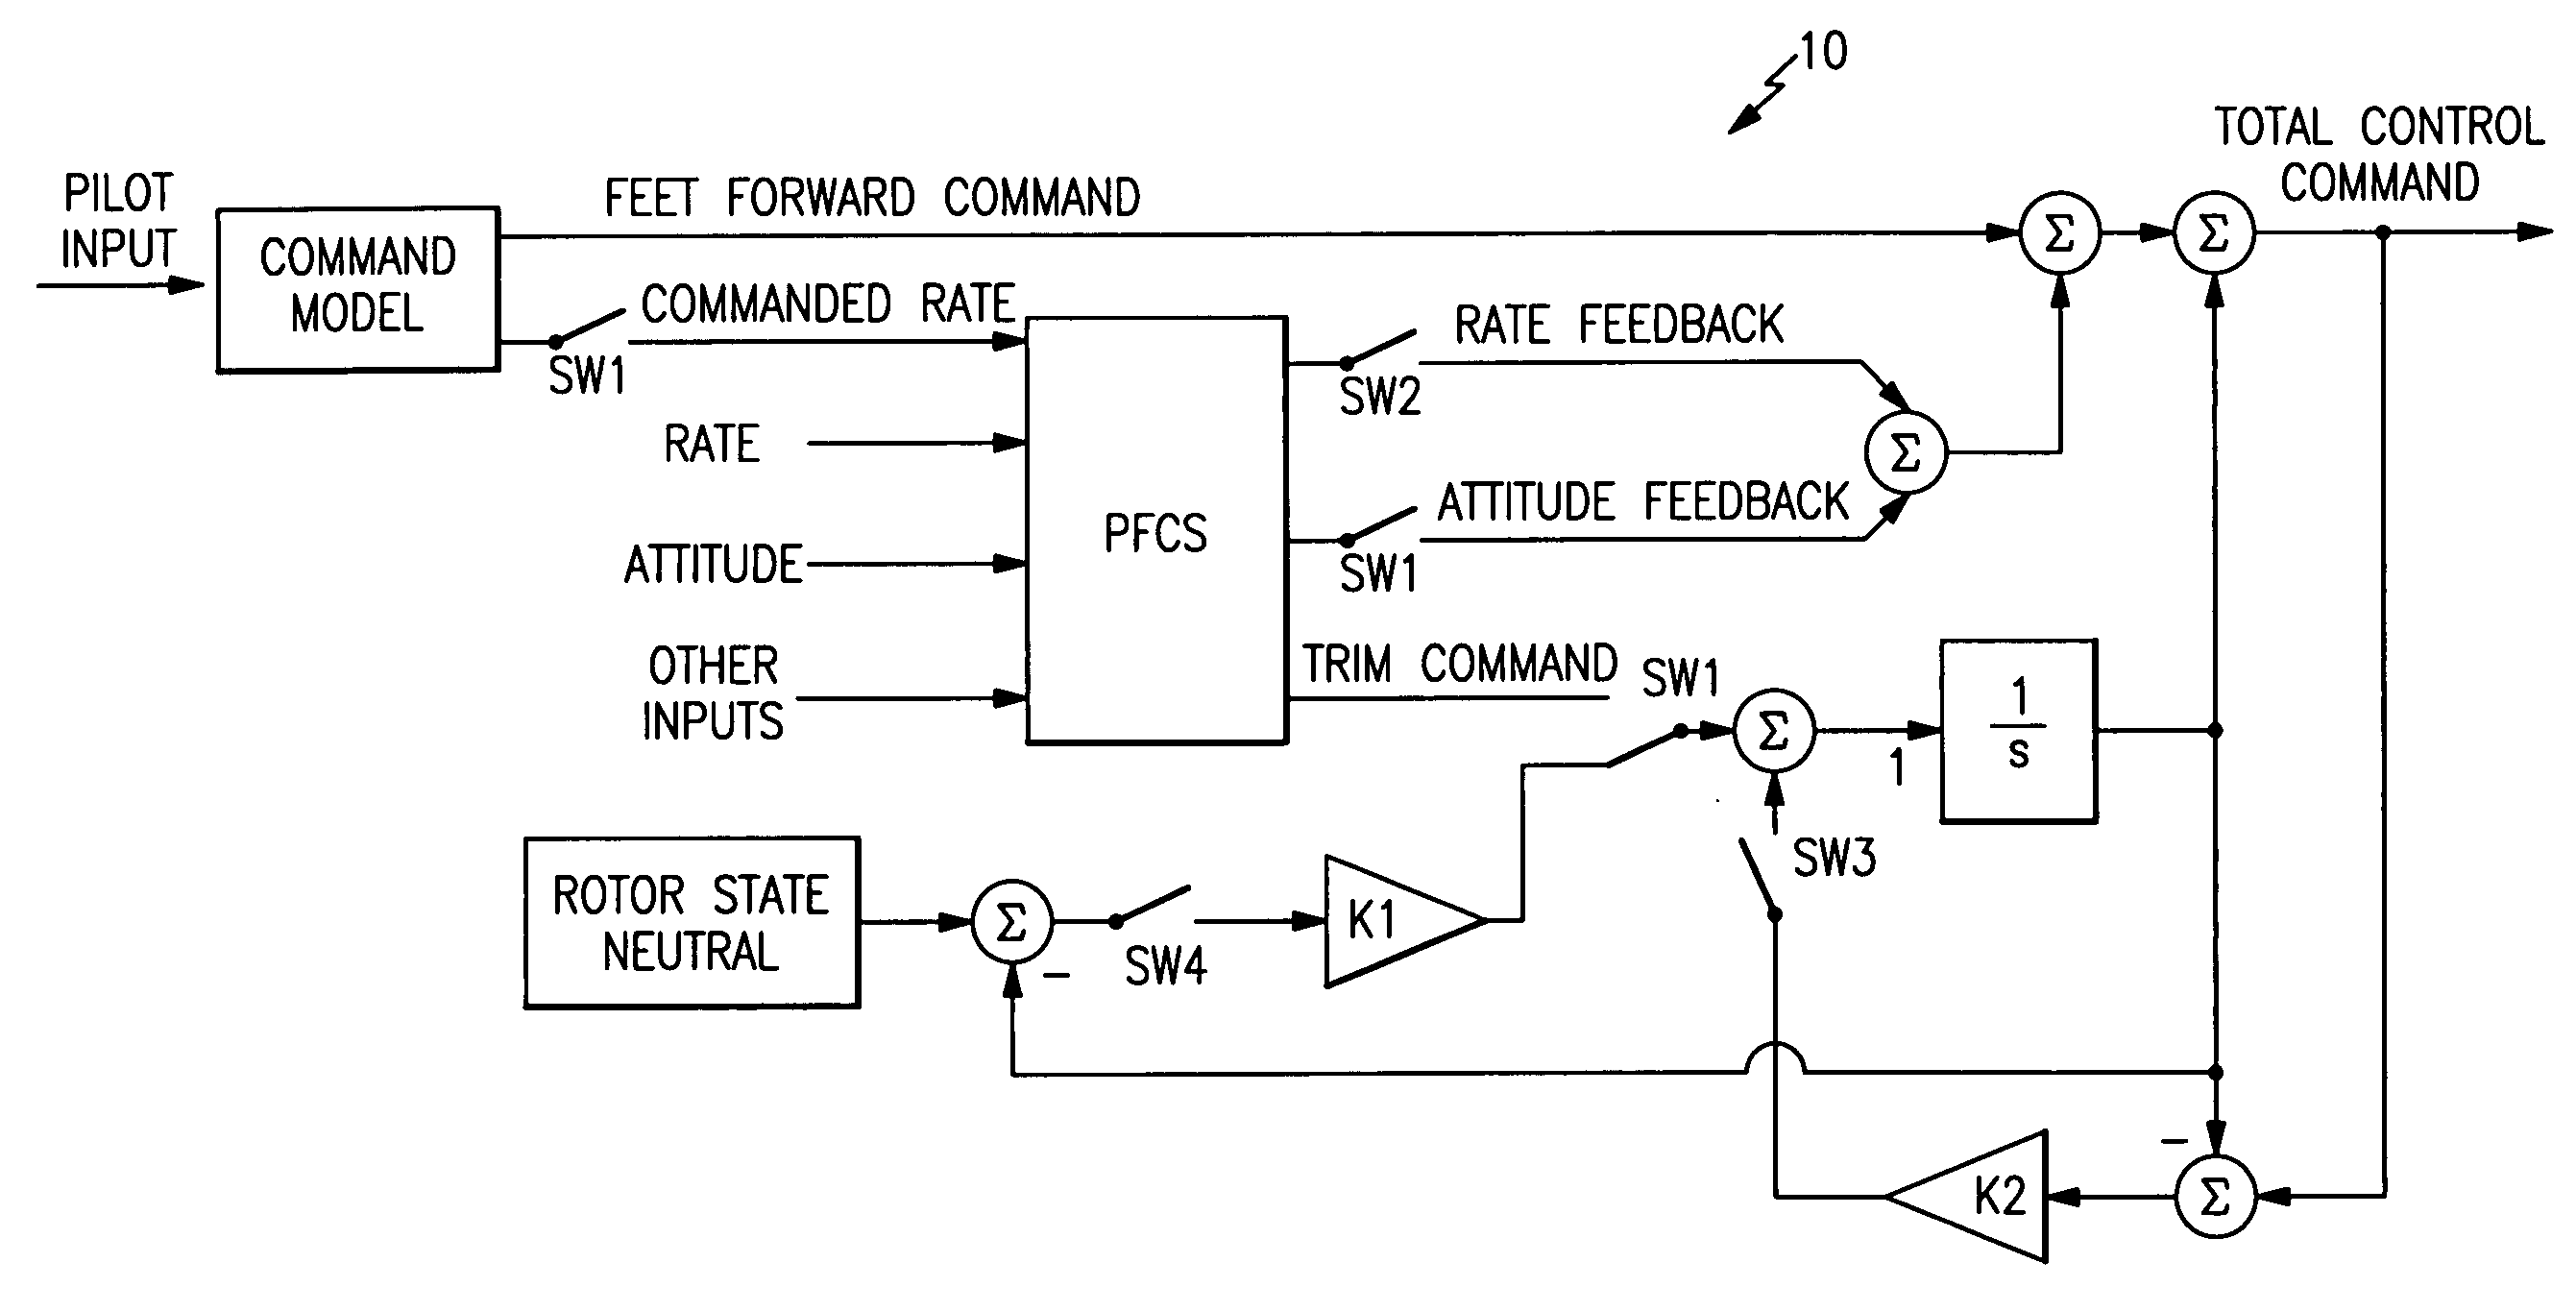 Surface contact override landing scheme for a FBW rotary-wing aircraft